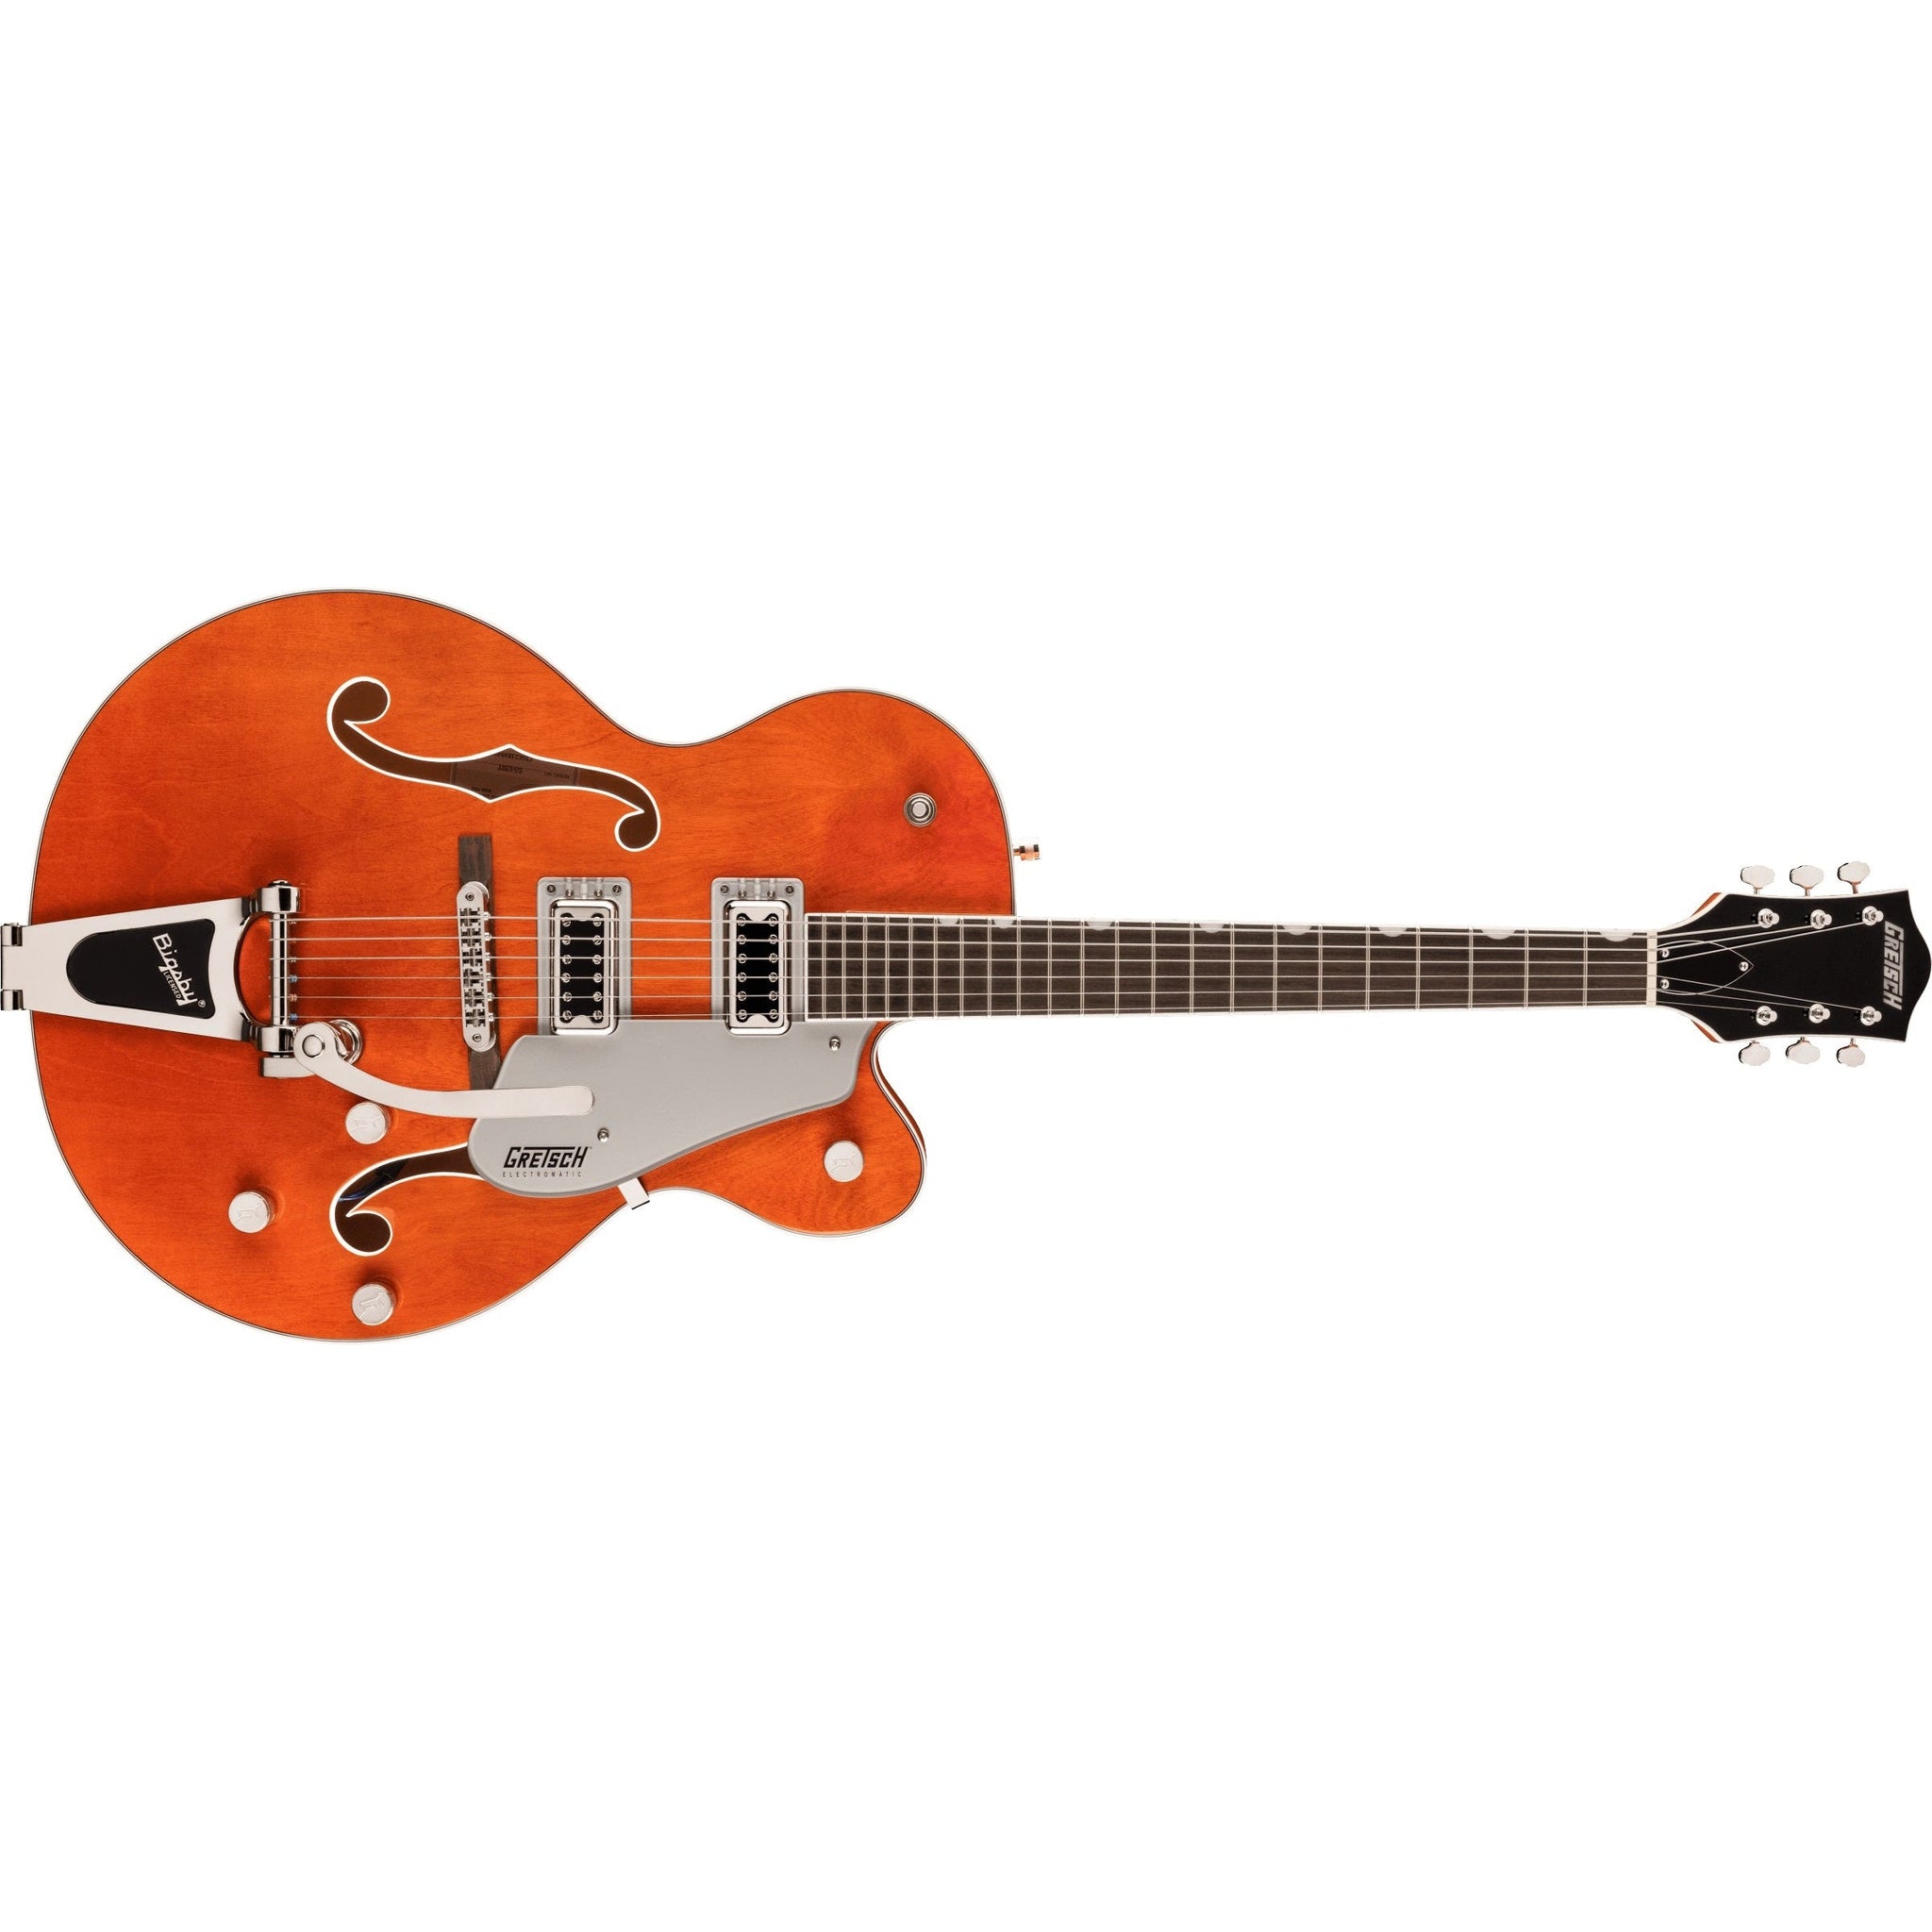 Gretsch G5420T Electromatic Classic Hollowbody Electric Guitar-Orange Stain-Music World Academy